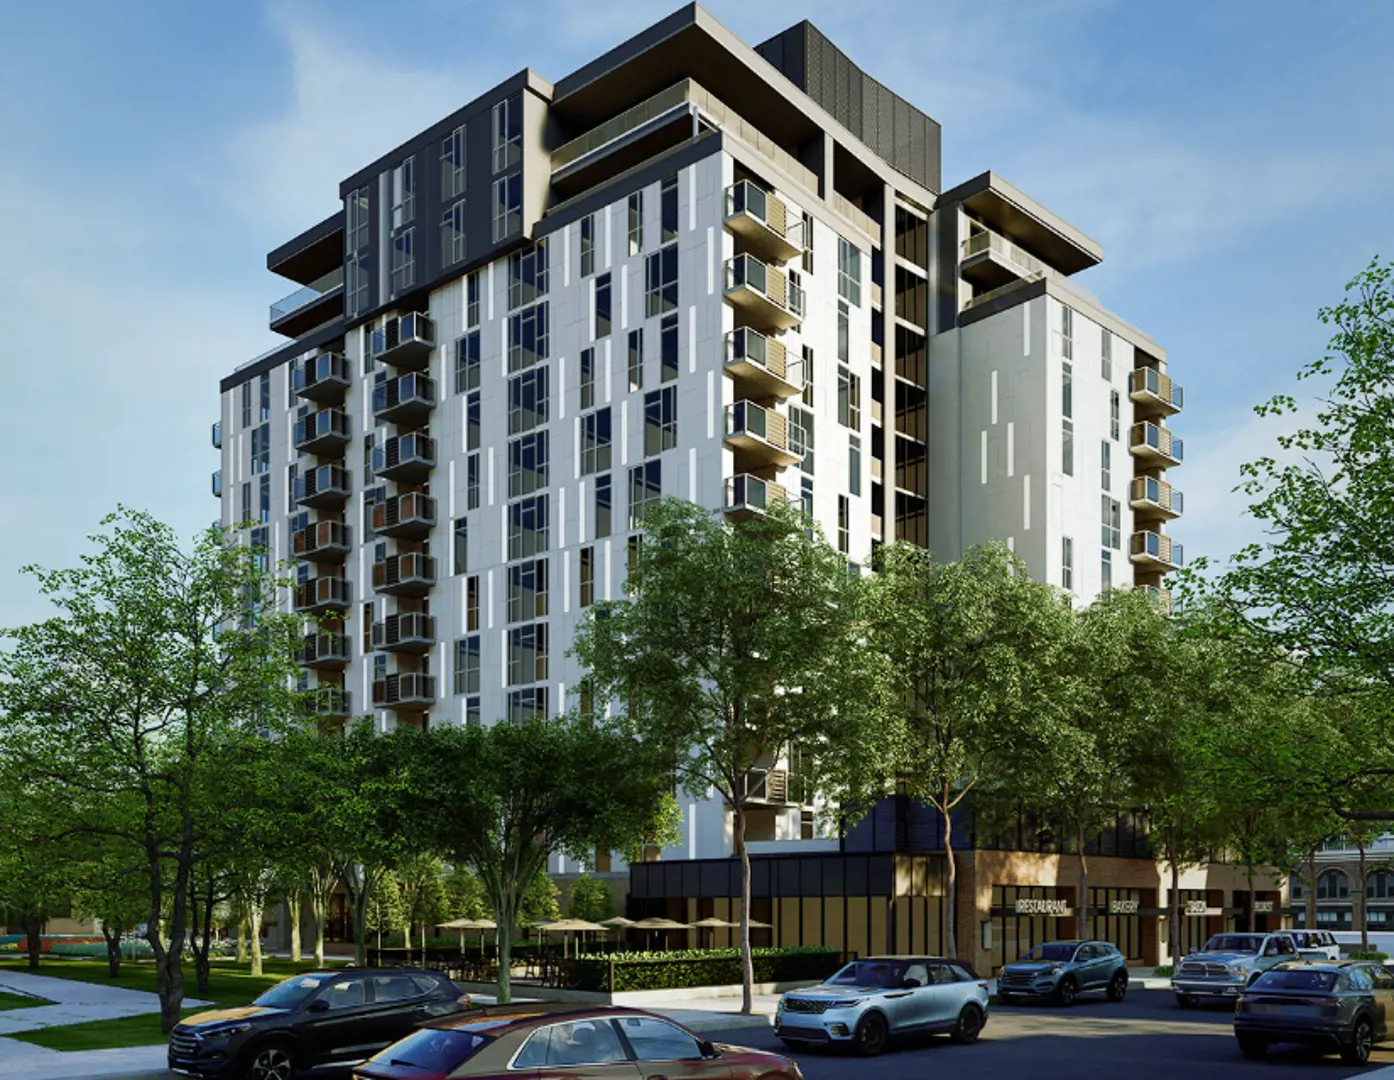 Rendering of Sovereign Condos exterior full view